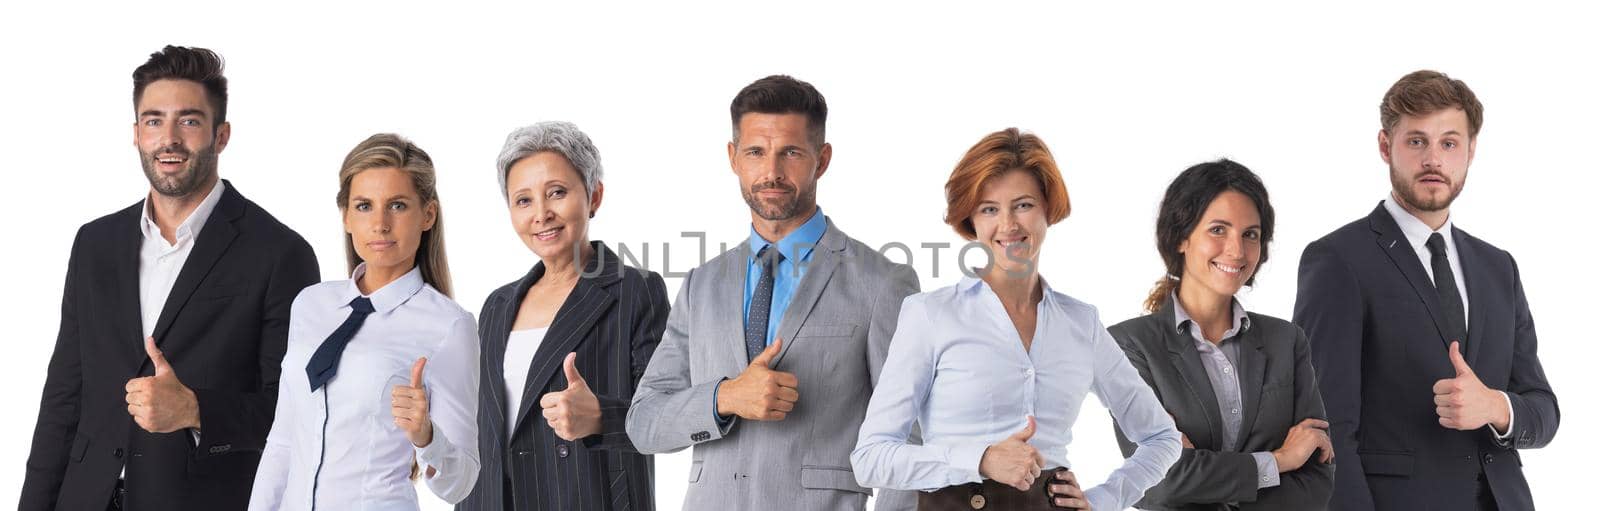 Successful happy business people team with thumbs up isolated on white background